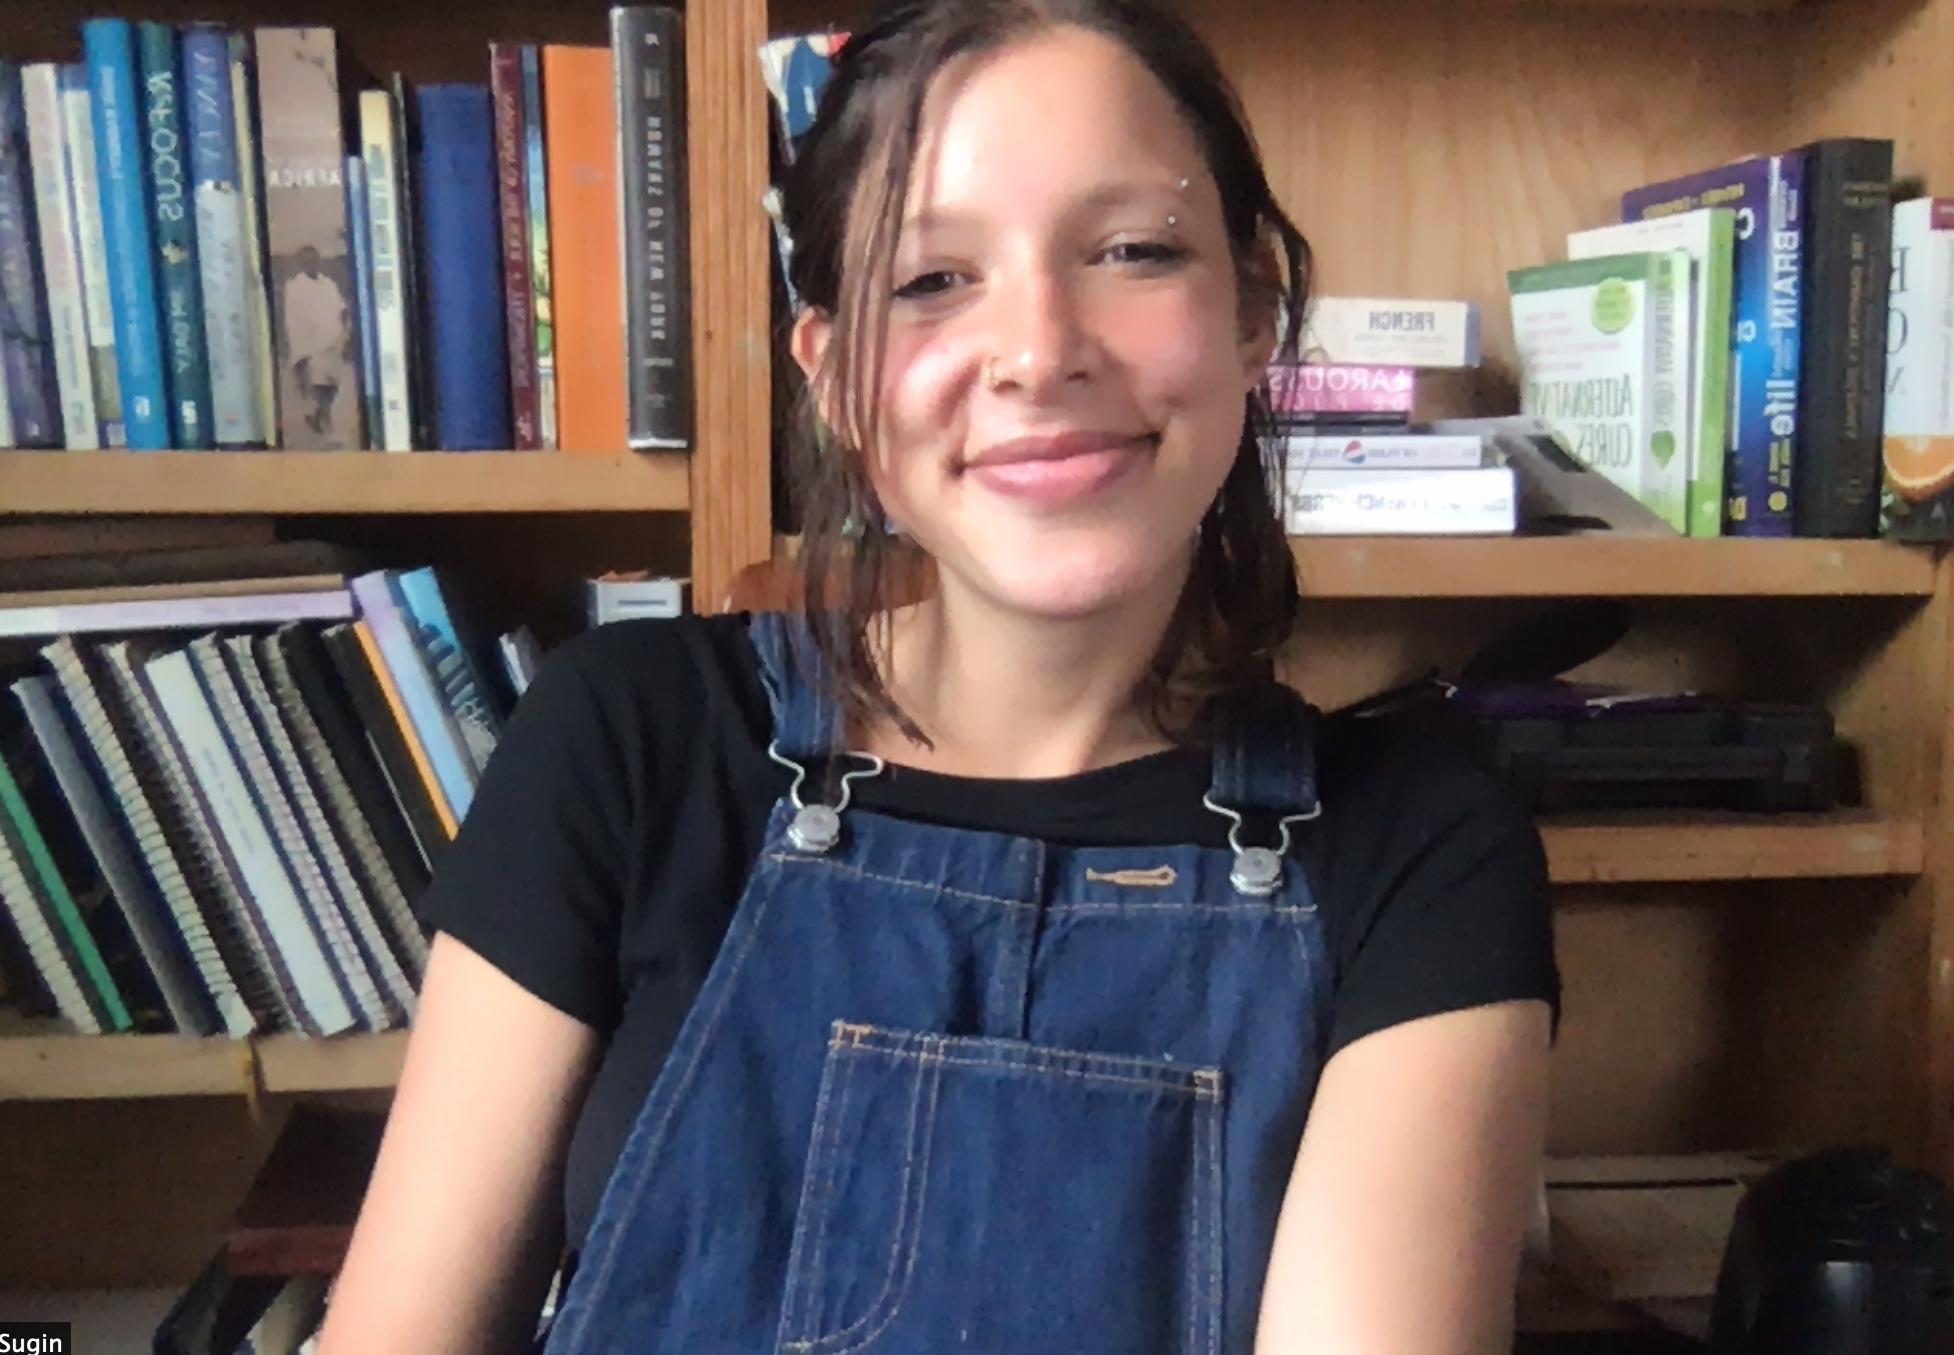 Aperson in a black teeshirt and dark blue jean overalls with short brown hair pulled back sitting in front of a bookshelf.